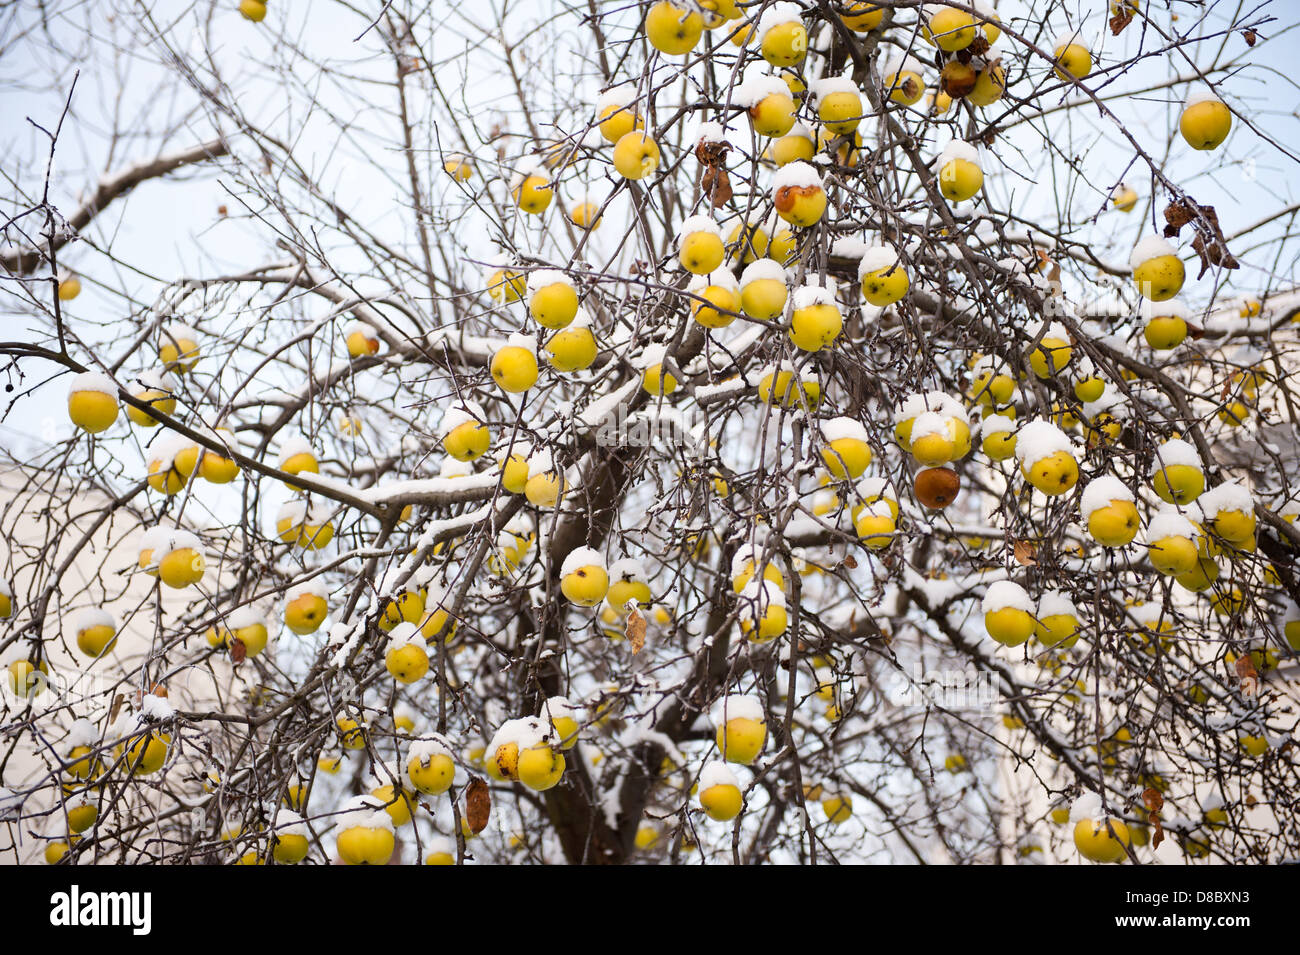 old apples sag on tree in snow Stock Photo